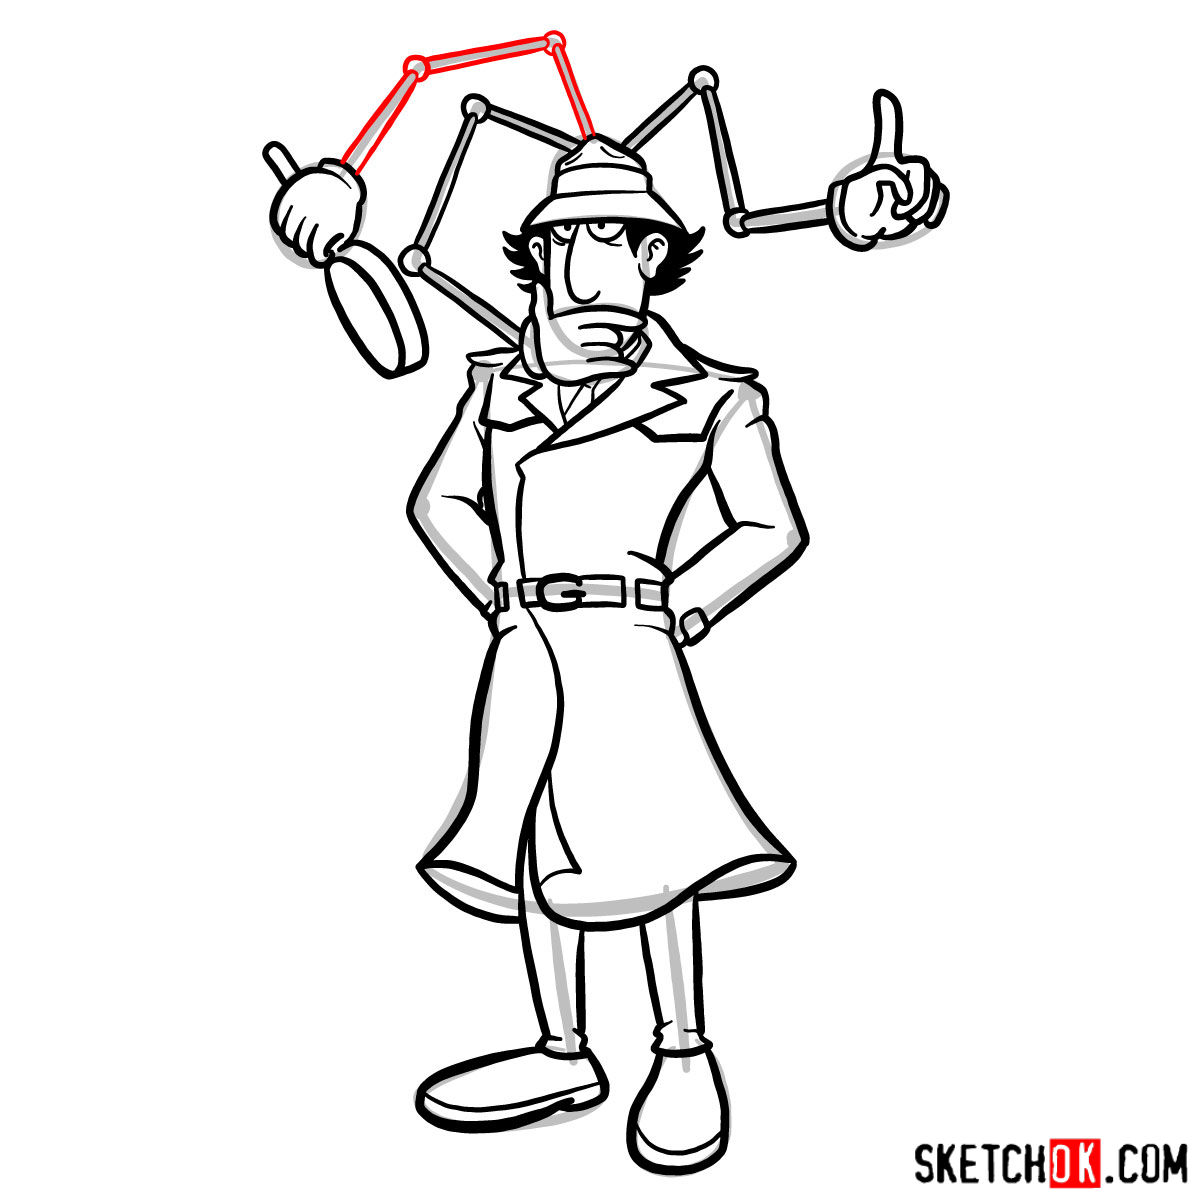 How to draw Inspector Gadget - step 15